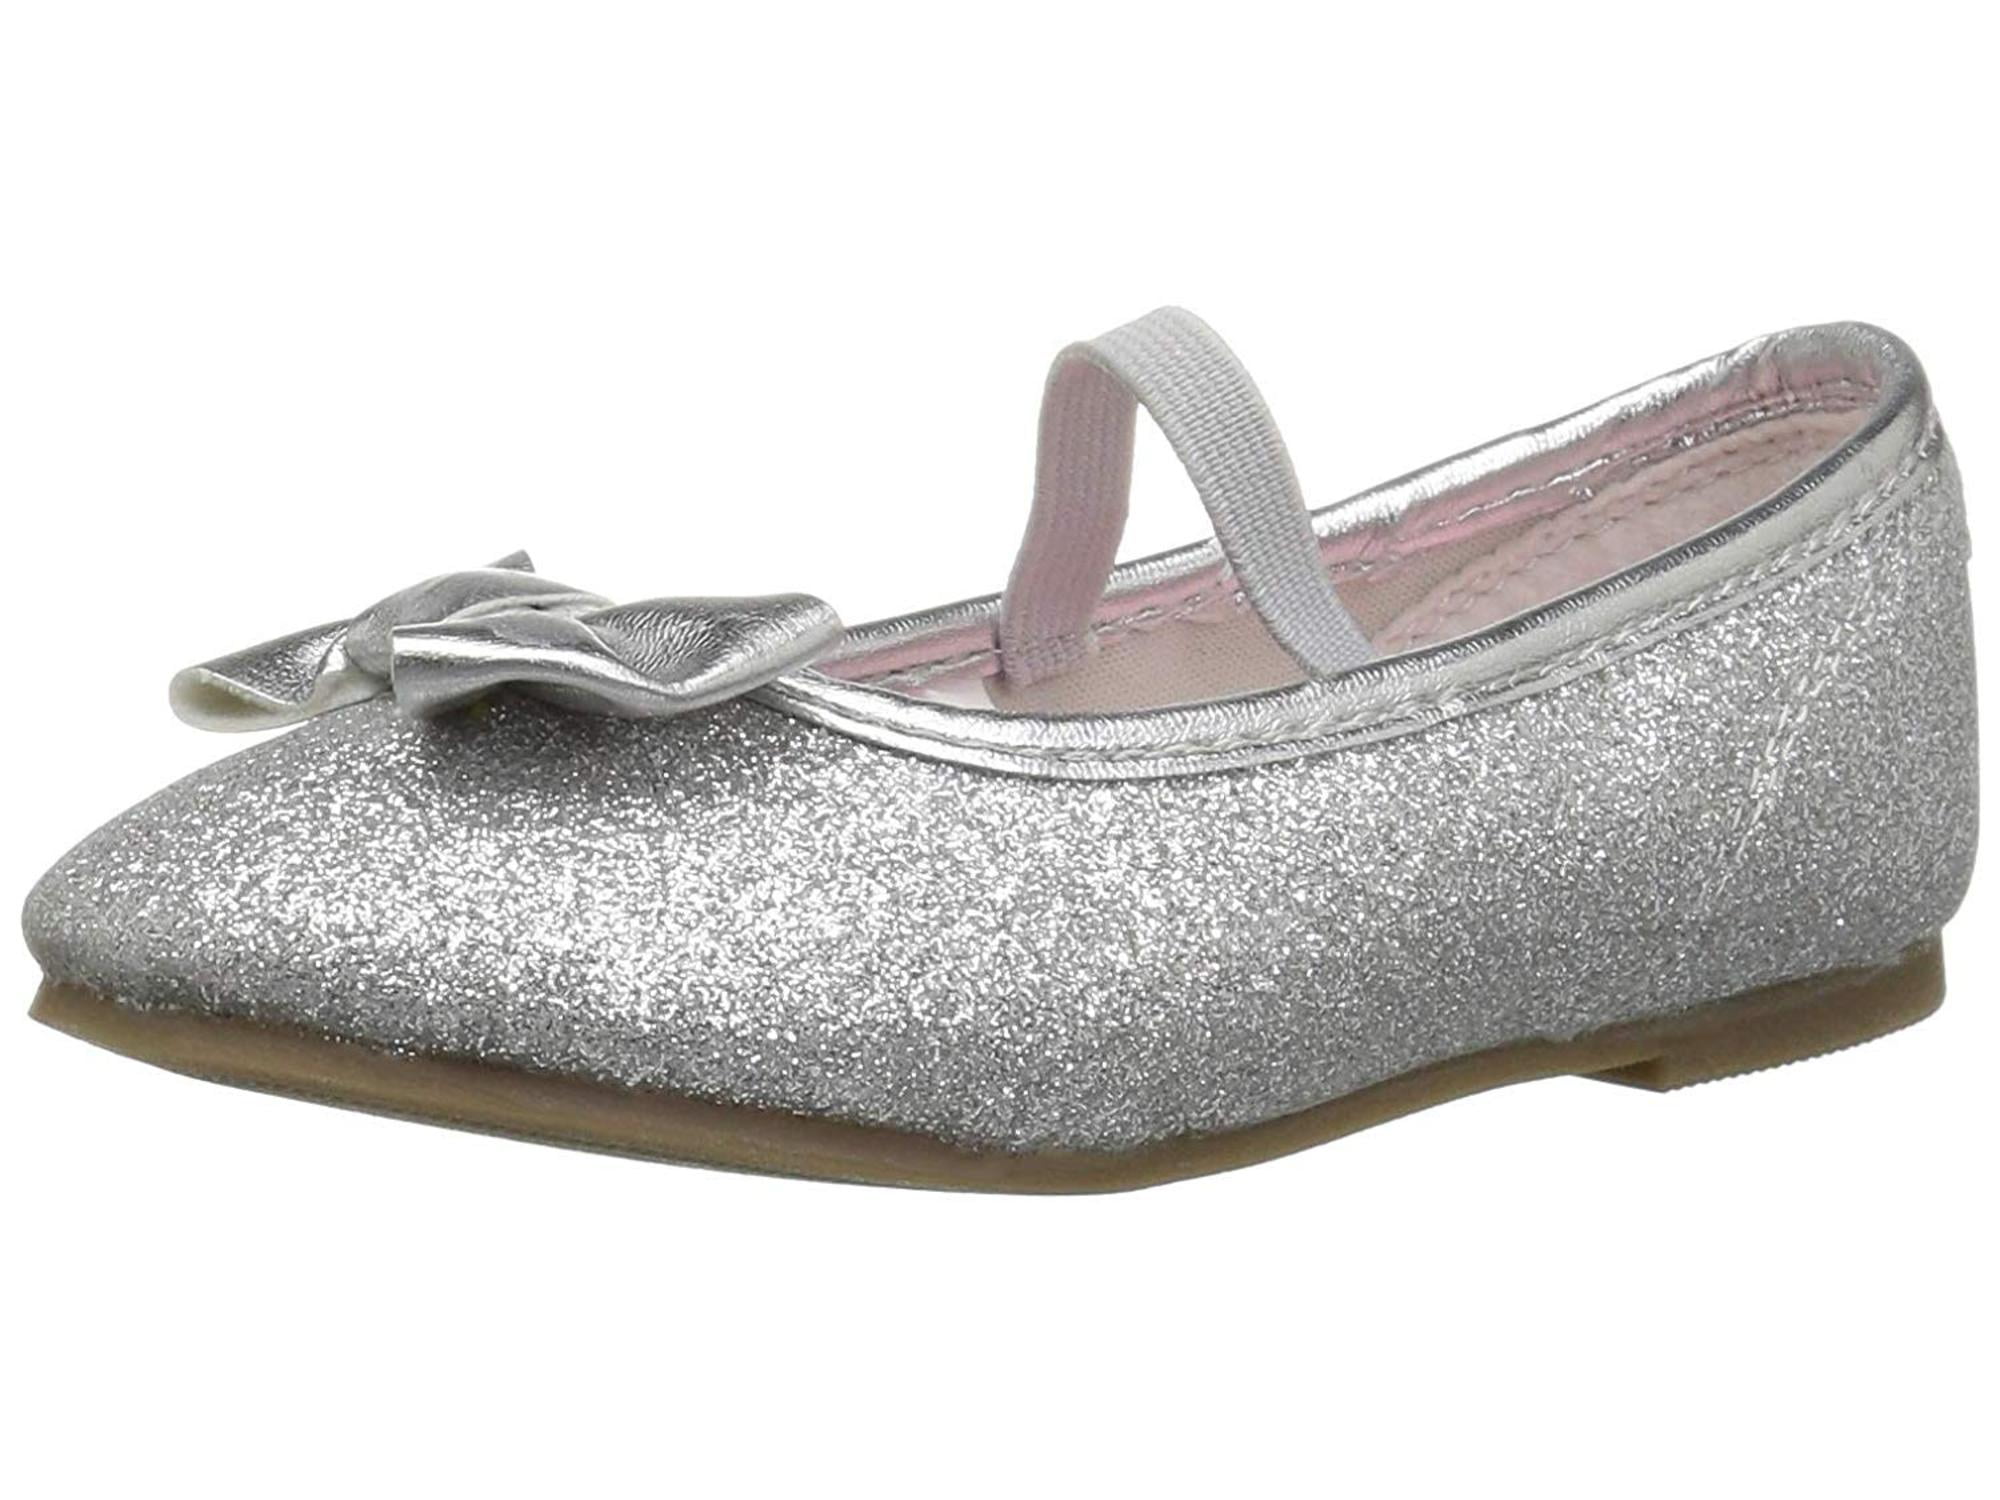 silver flats for toddlers